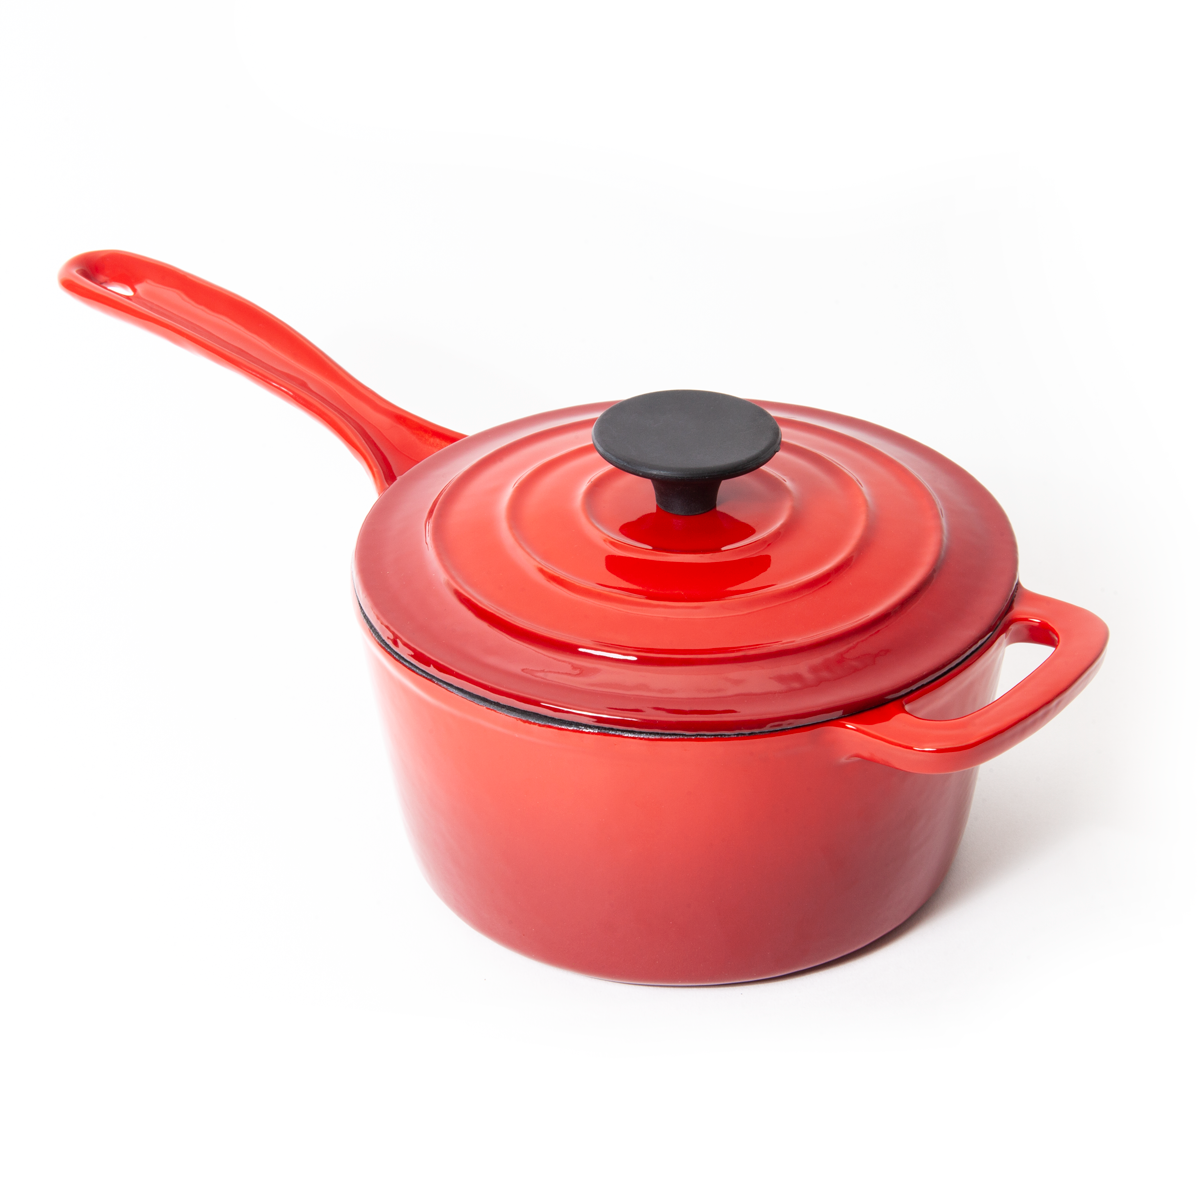 Enameled Cast Iron 2 Quart Sauce Pan with Lid - Red – Eco + Chef